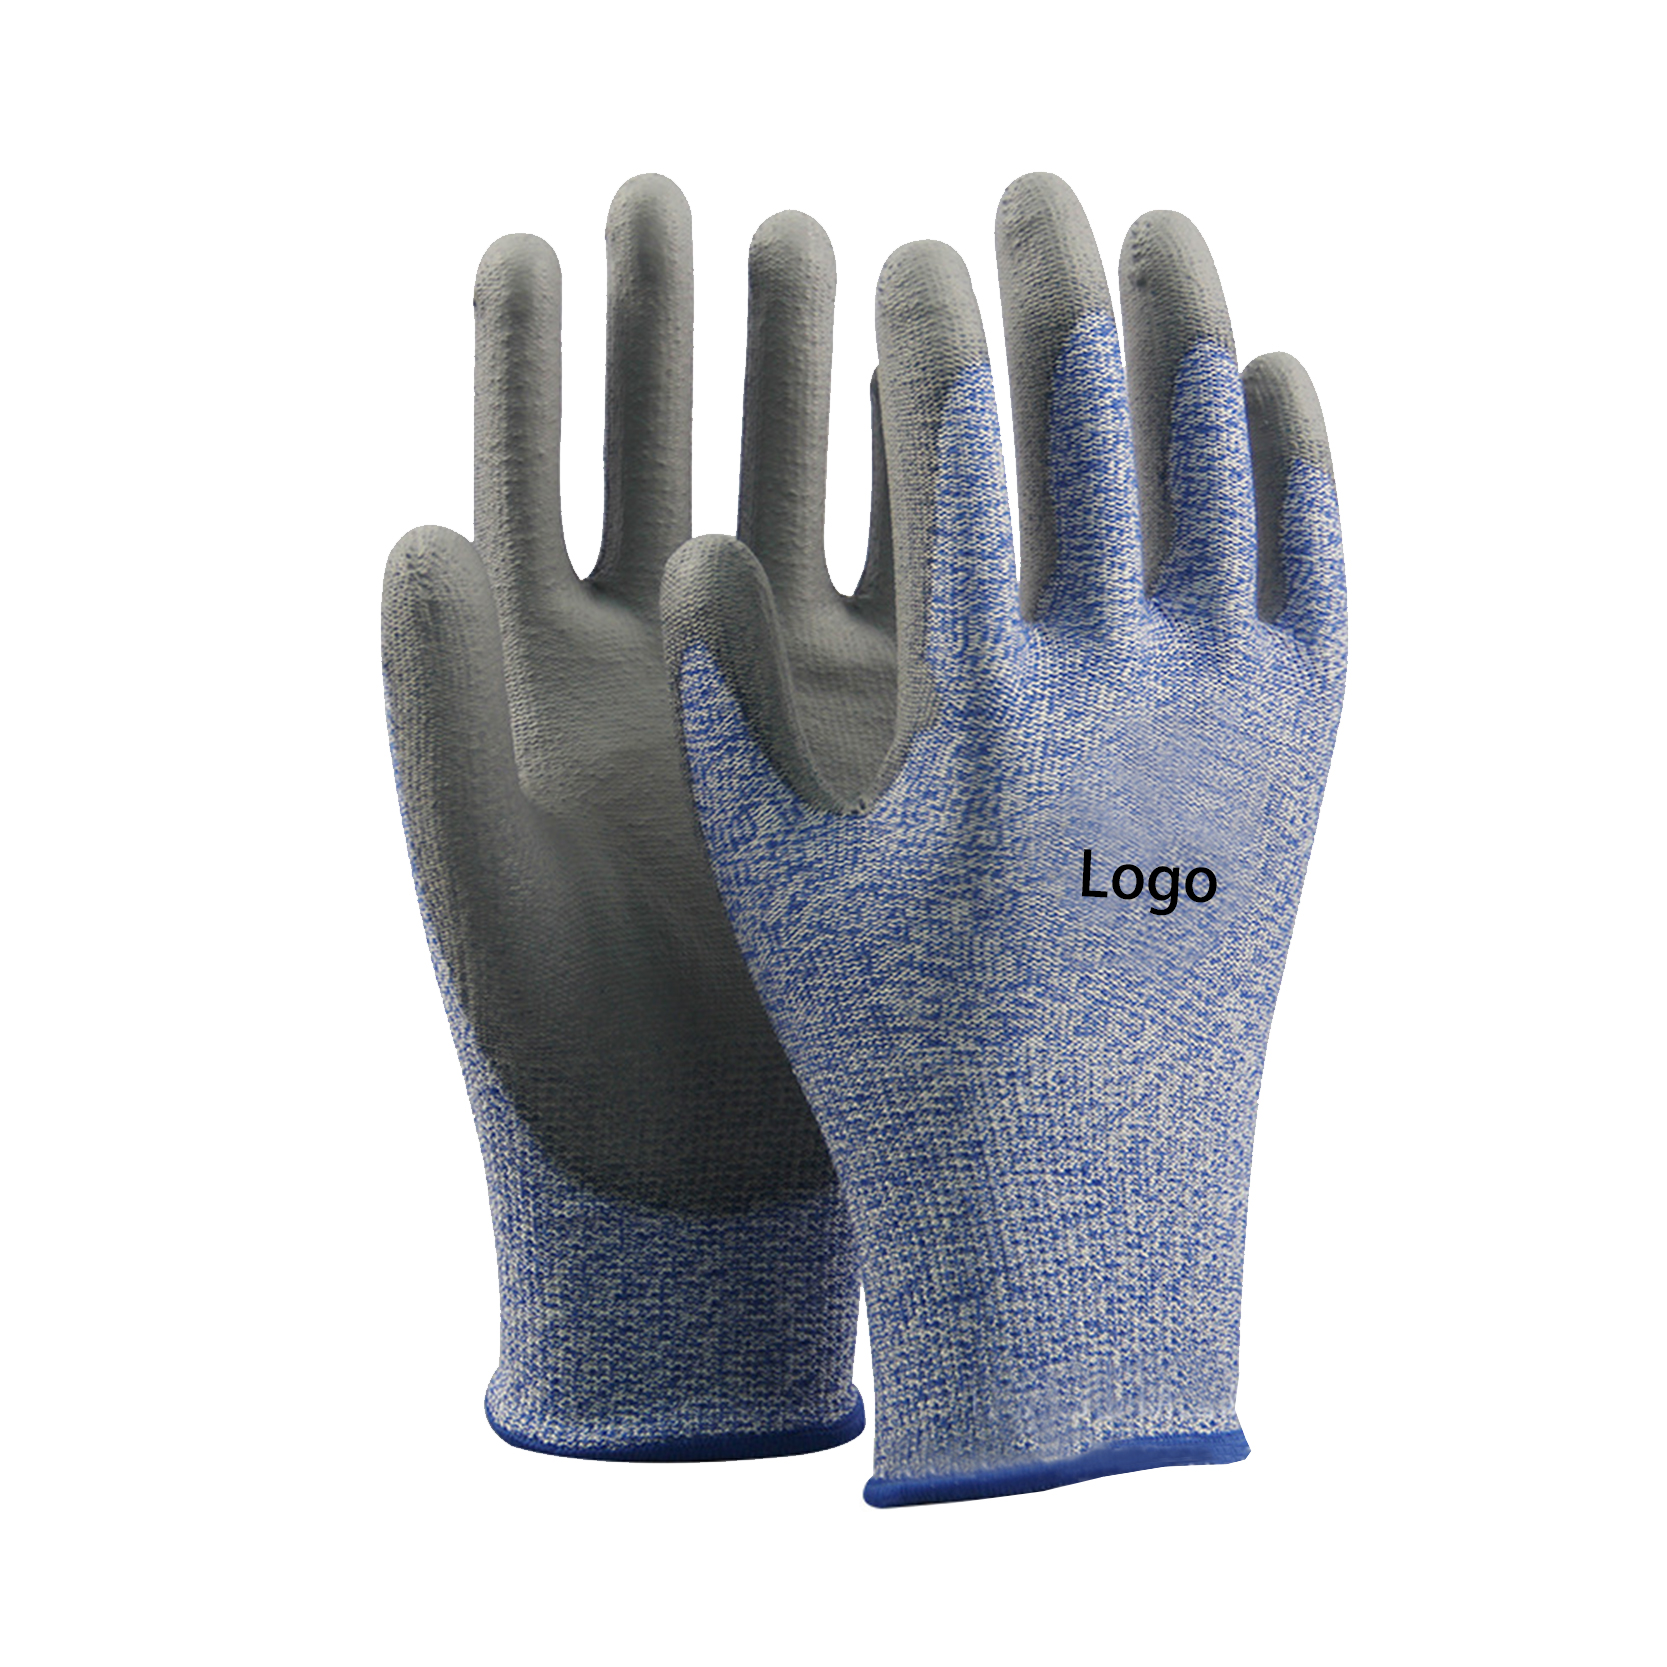 Cut Resistant Hppe Industrial Pu Full Coated Gloves Hard Work Anti Cut Gloves